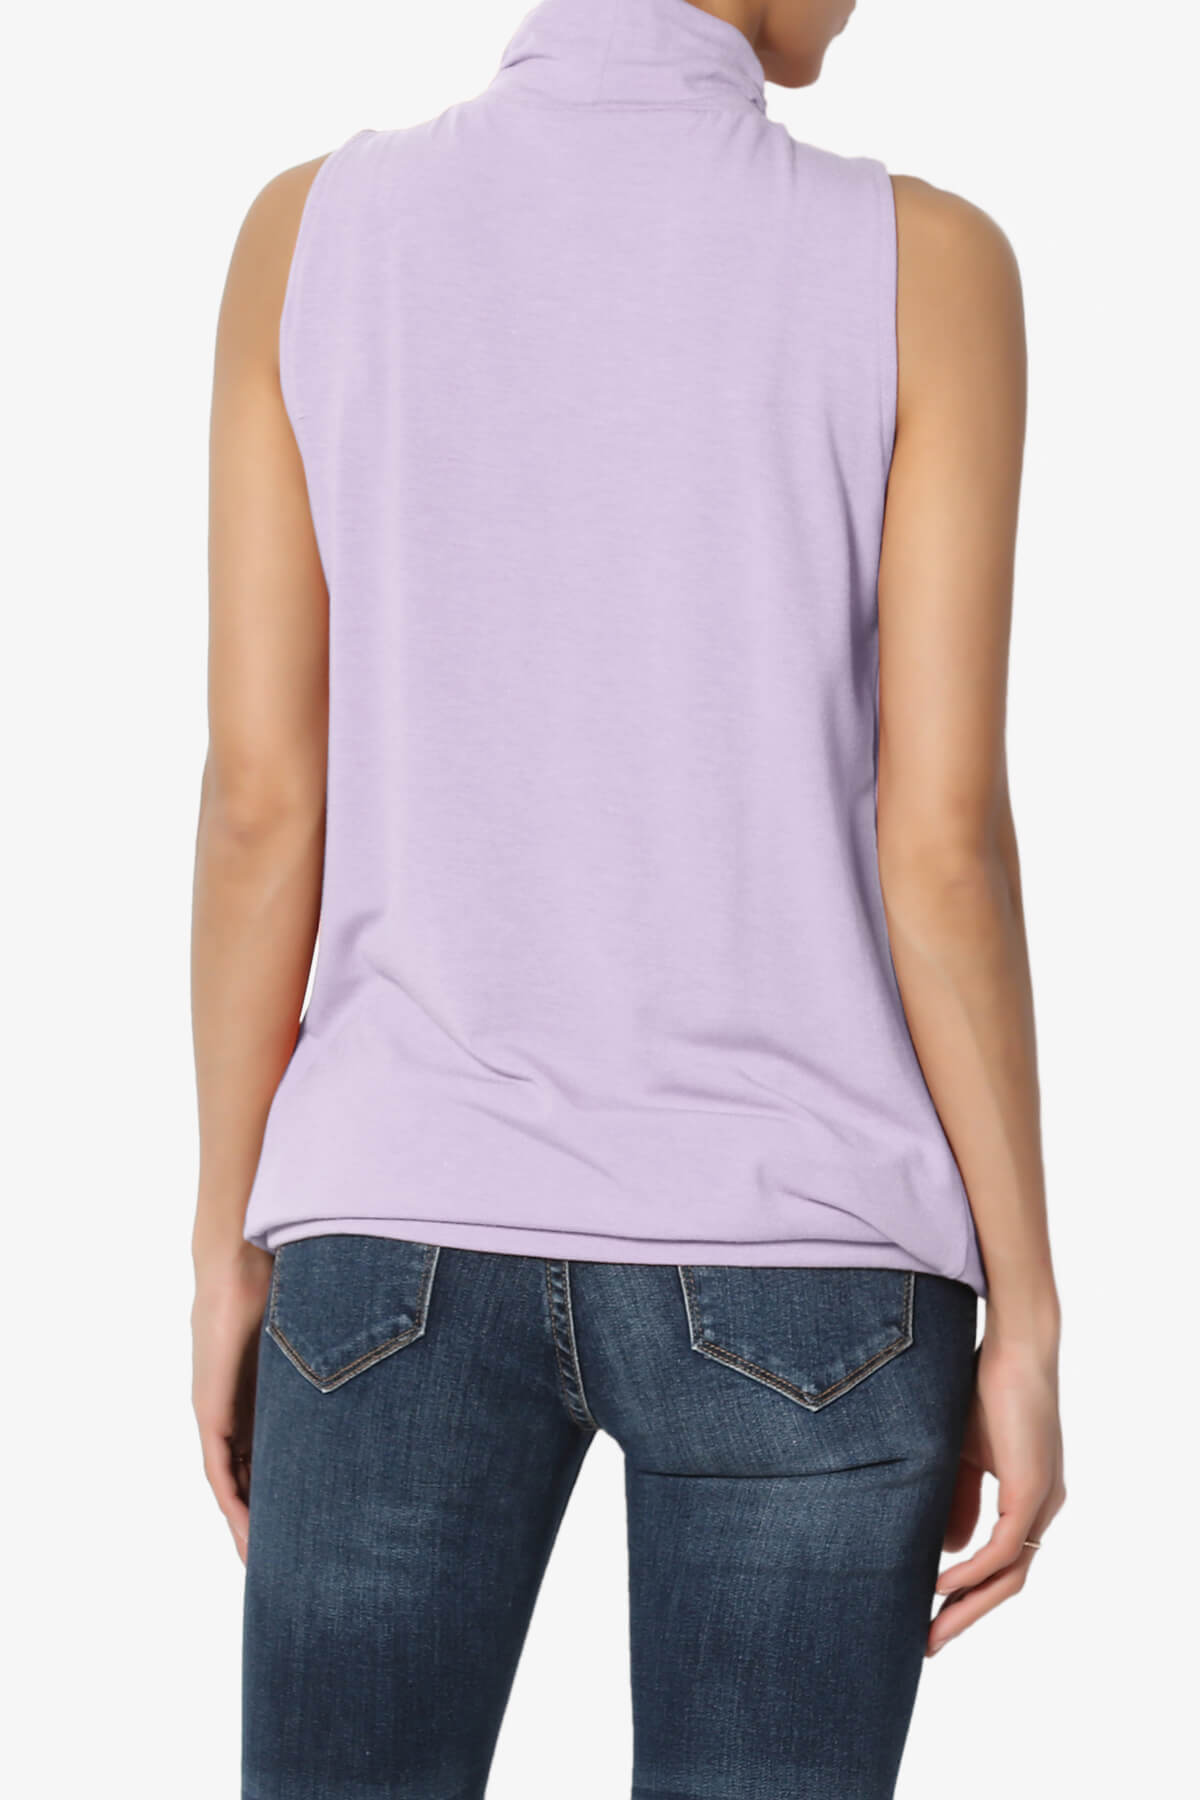 Load image into Gallery viewer, Jibbitz Sleeveless Mock Neck Pleated Top DUSTY LAVENDER_2
